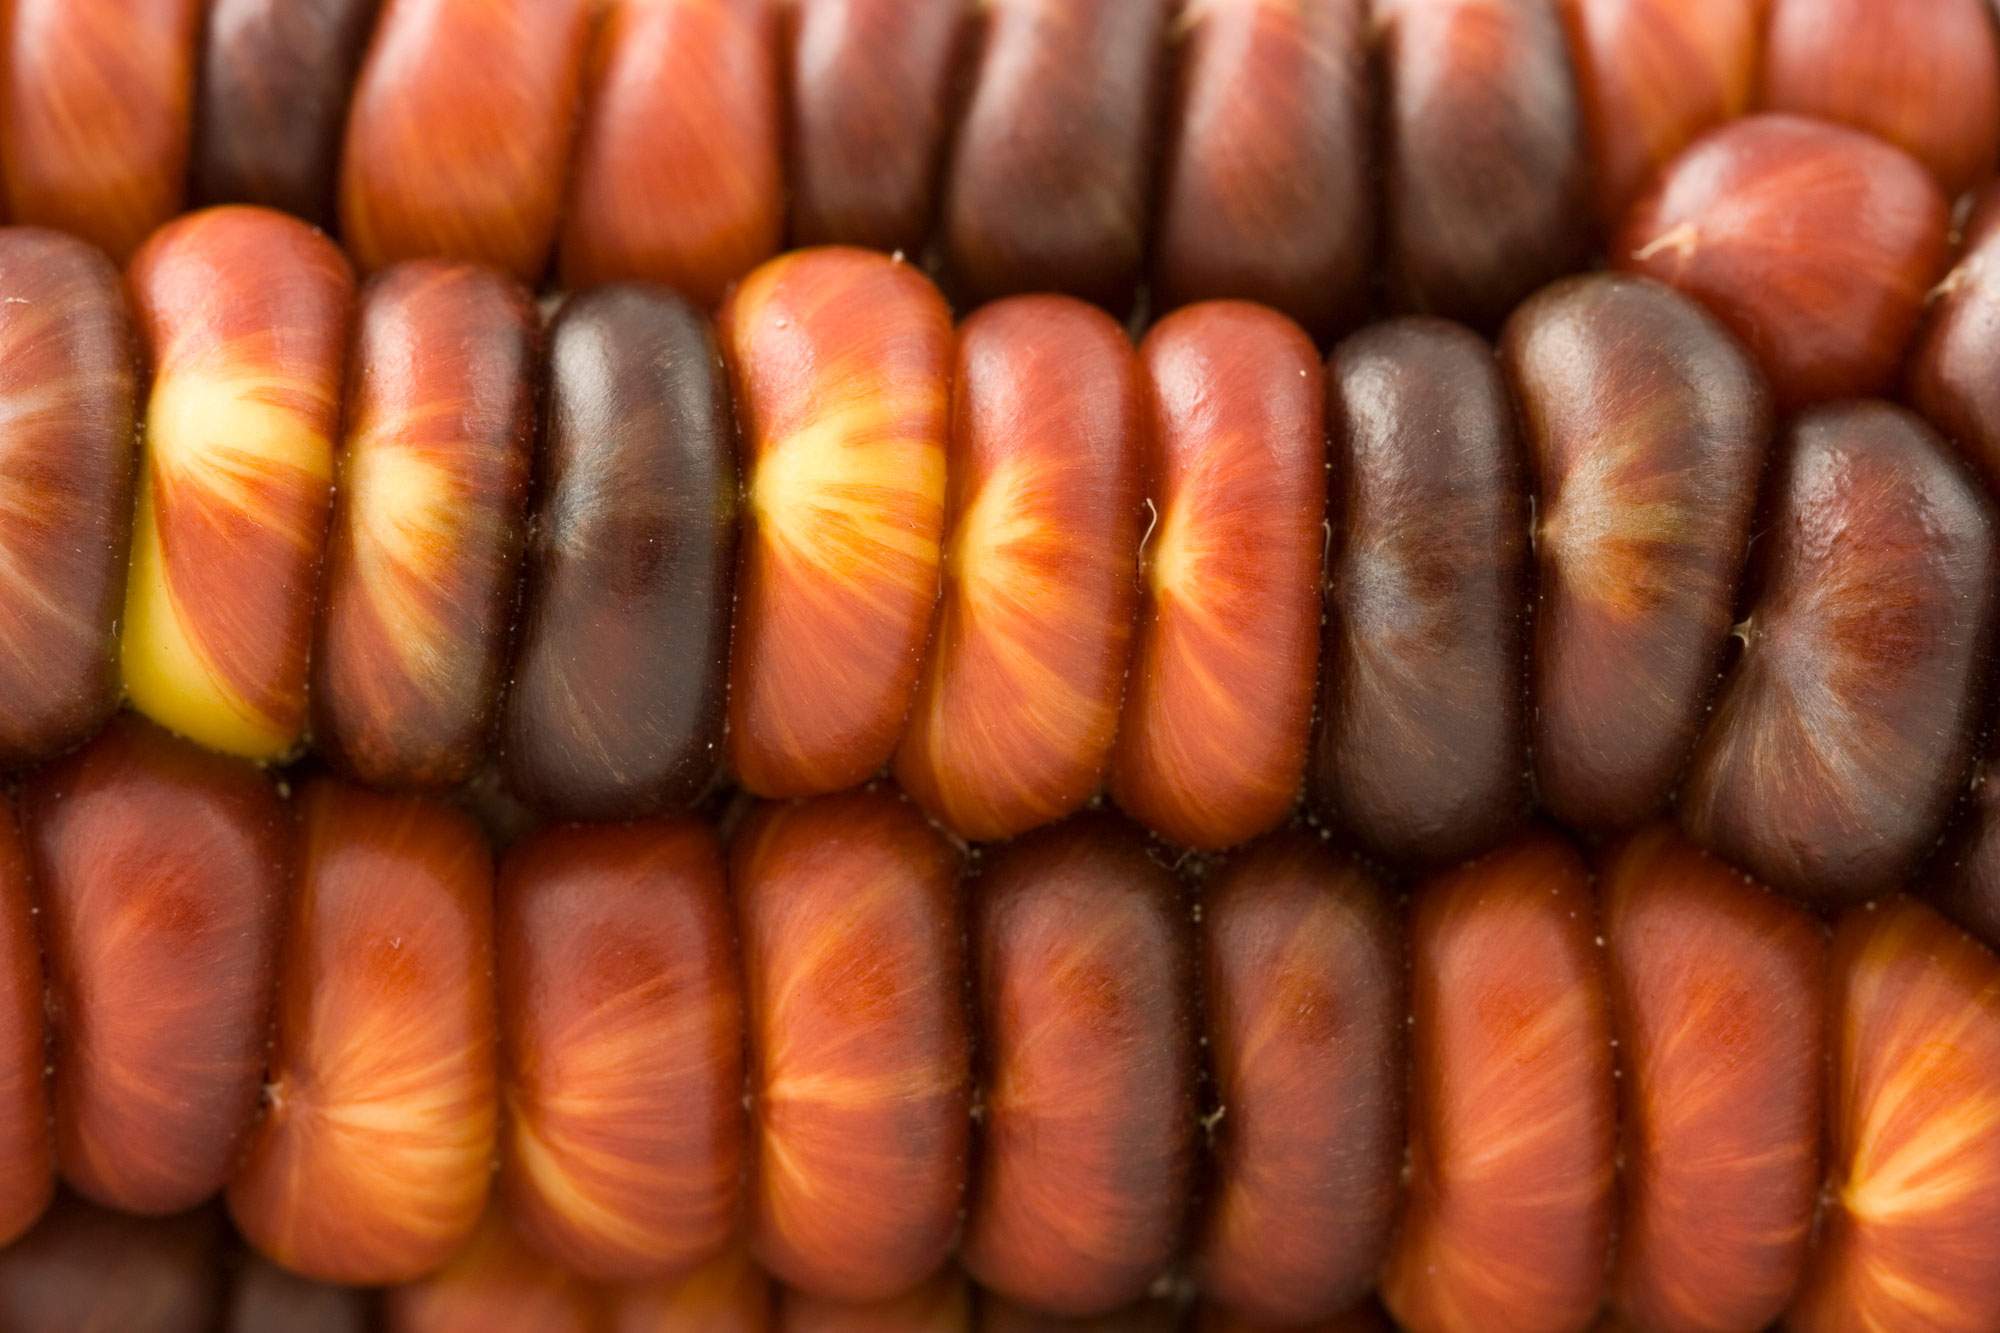 Photograph showing a close-up of maize kernels varying from brown to red with yellow stripes or streaks on them.